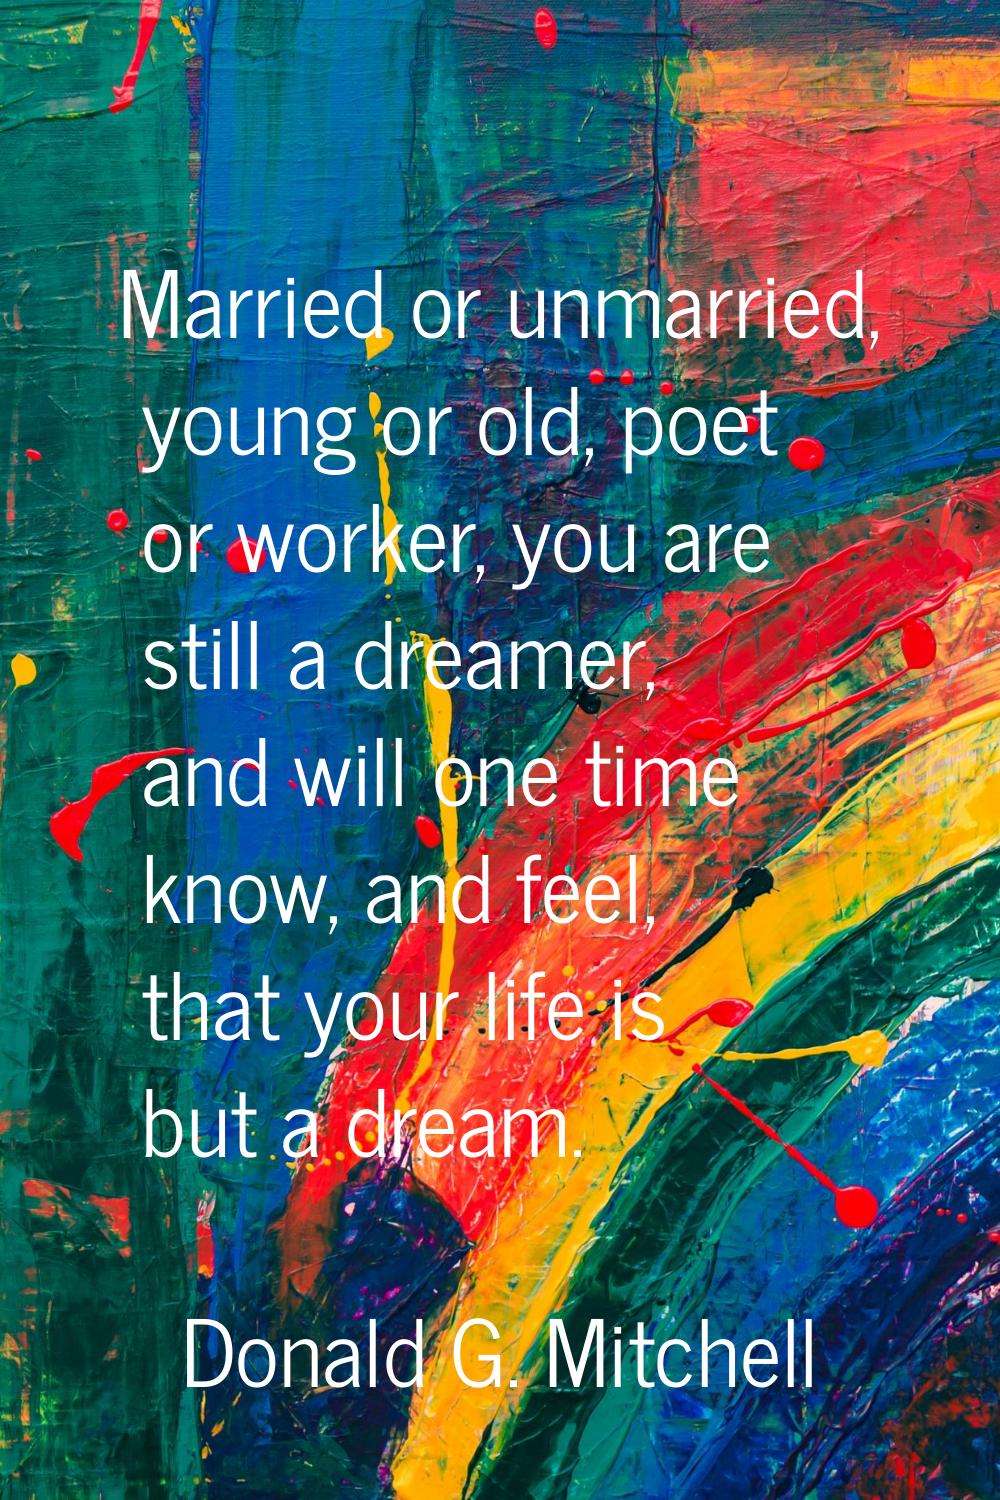 Married or unmarried, young or old, poet or worker, you are still a dreamer, and will one time know